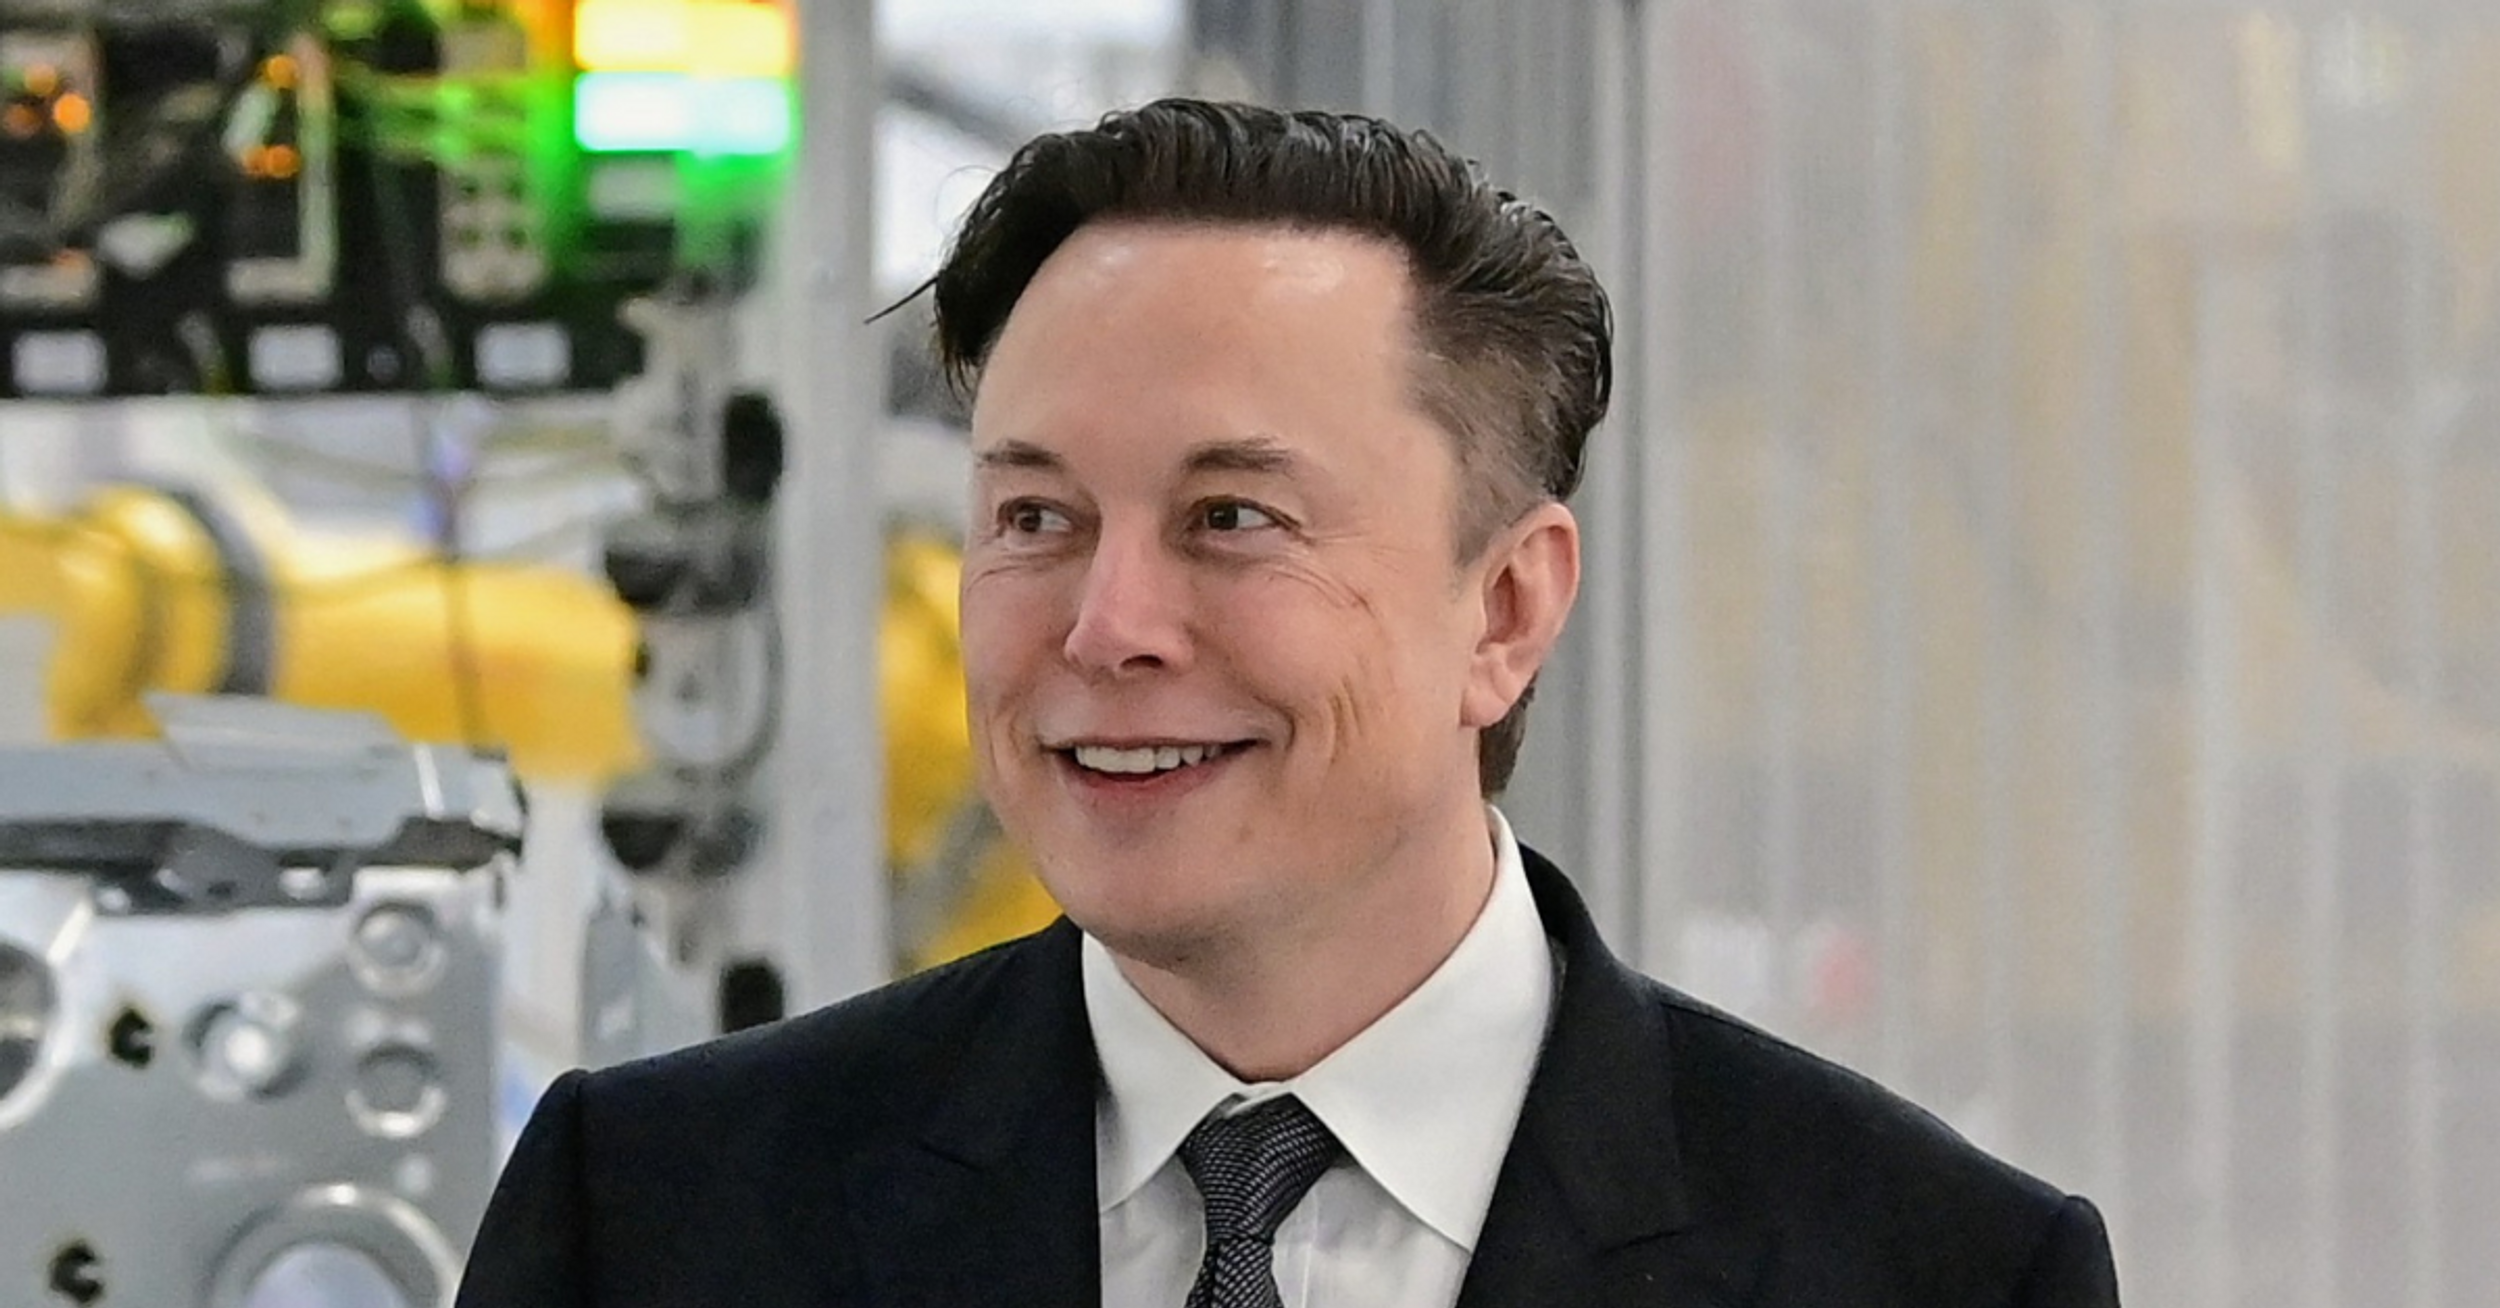 Elon Musk Gets Brutal Fact-Check After He Says Democrats Have Been 'Hijacked By Extremists'